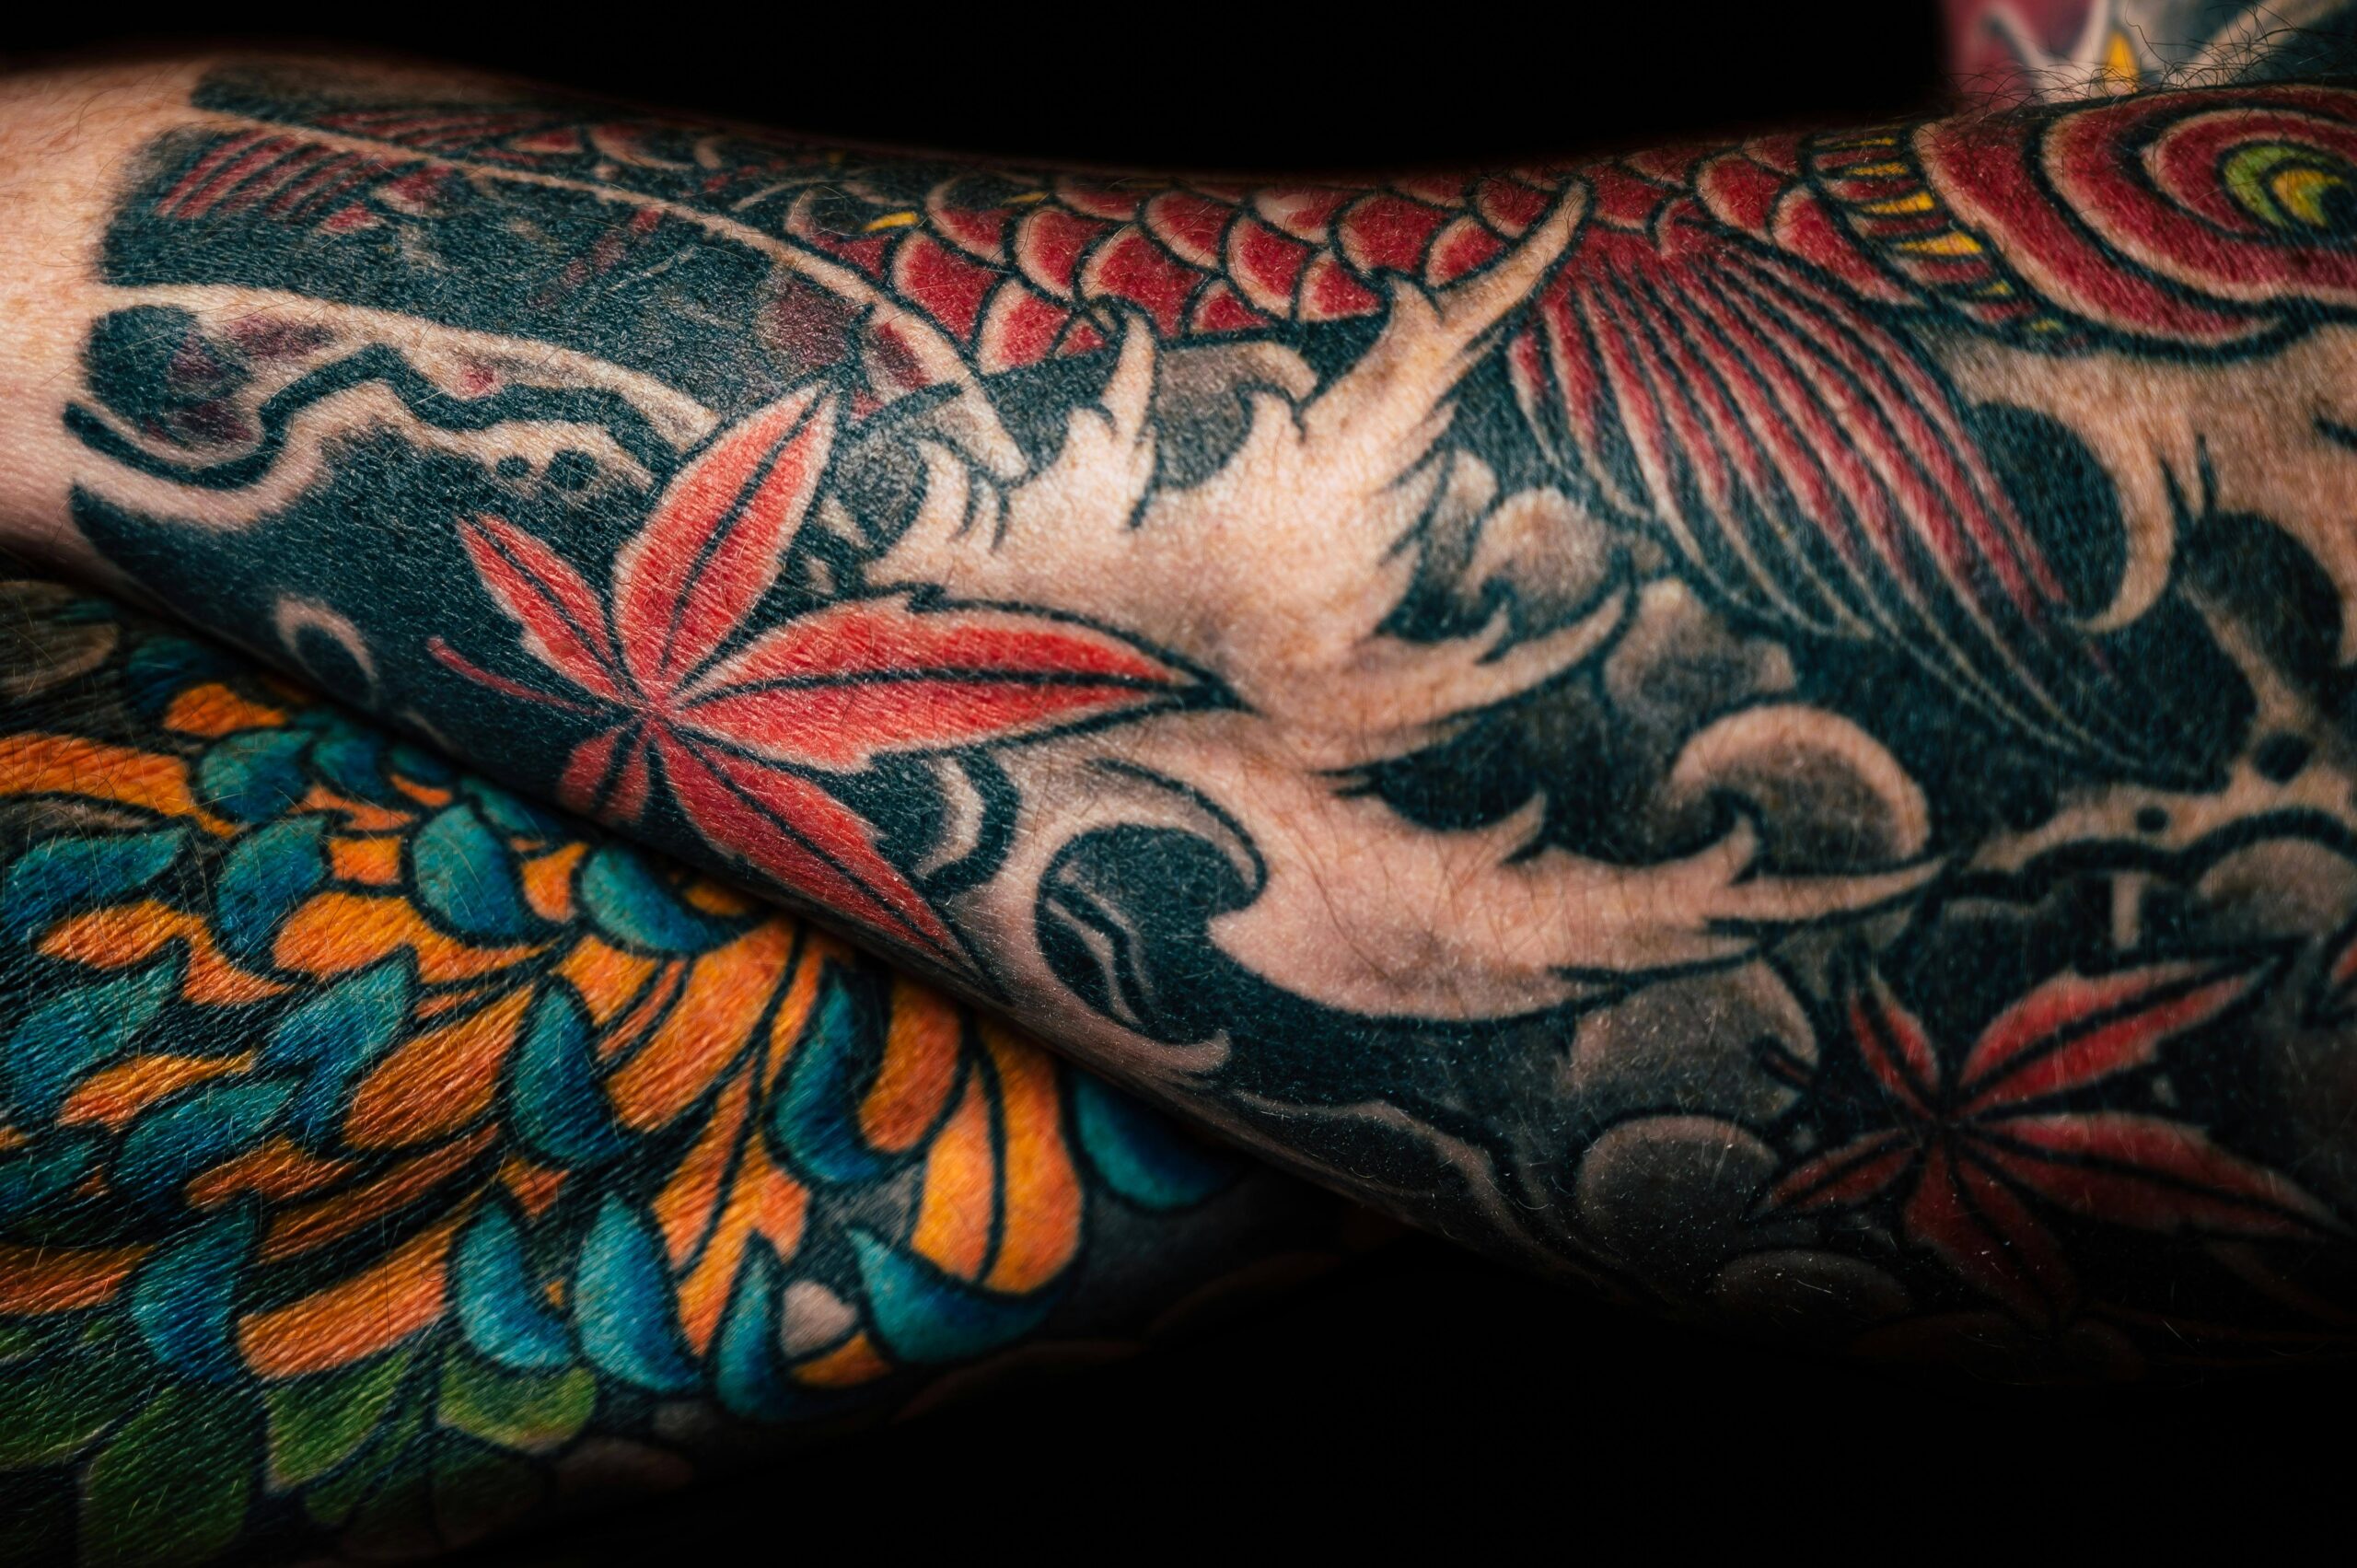 Fostering Creativity in Your Tattoo Shop Environment